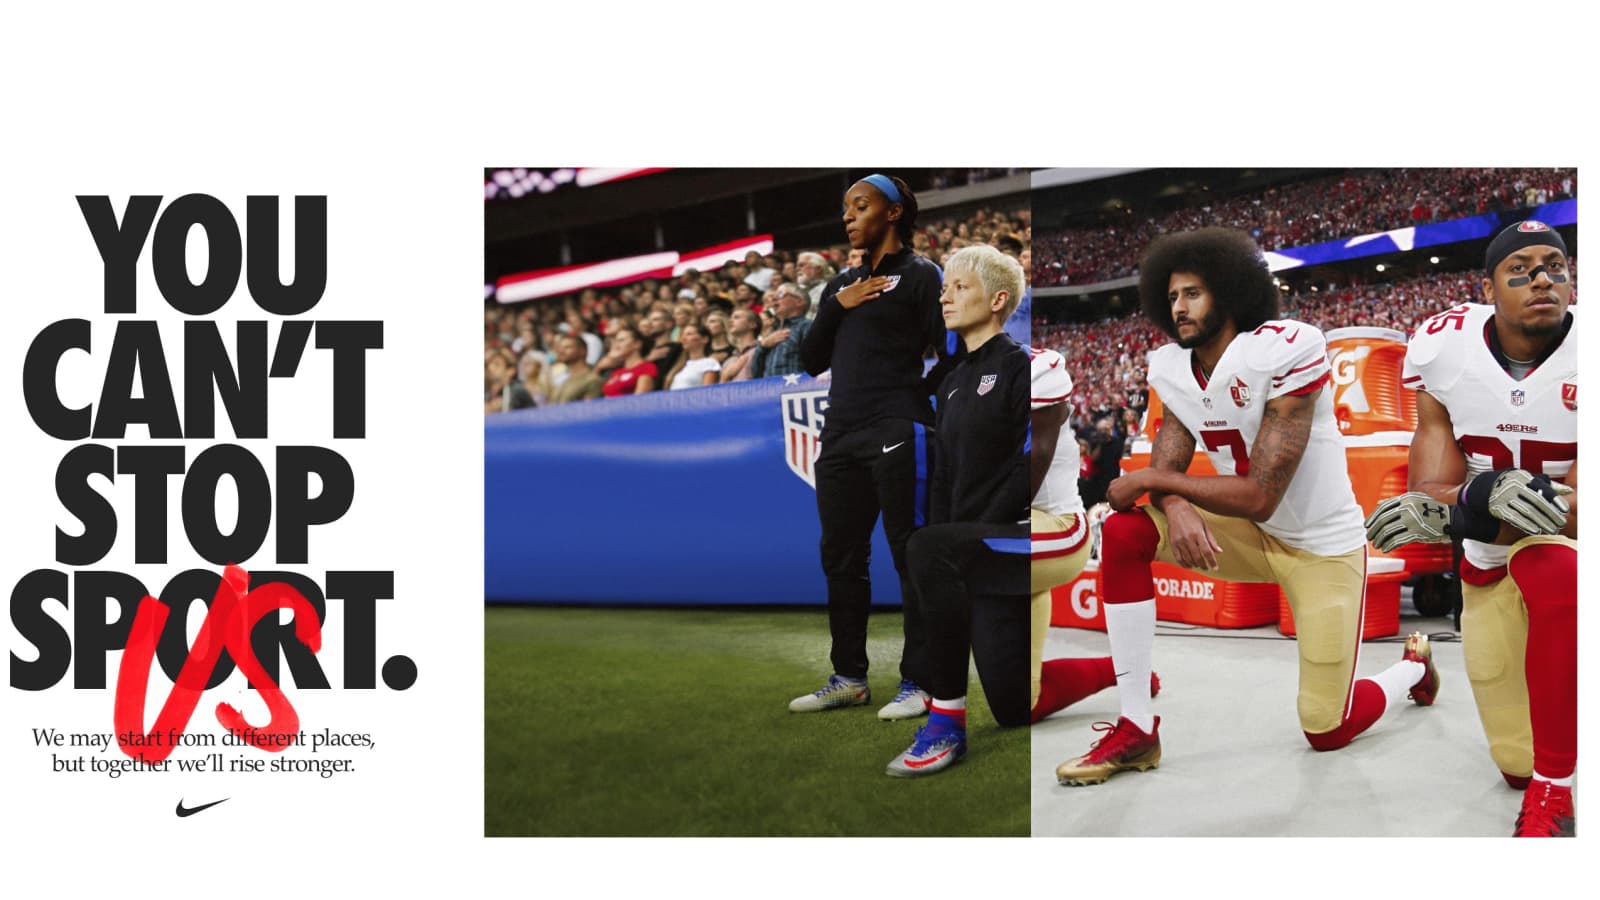 Megan Rapinoe Speaks Out About Race And Change In Nike Campaign